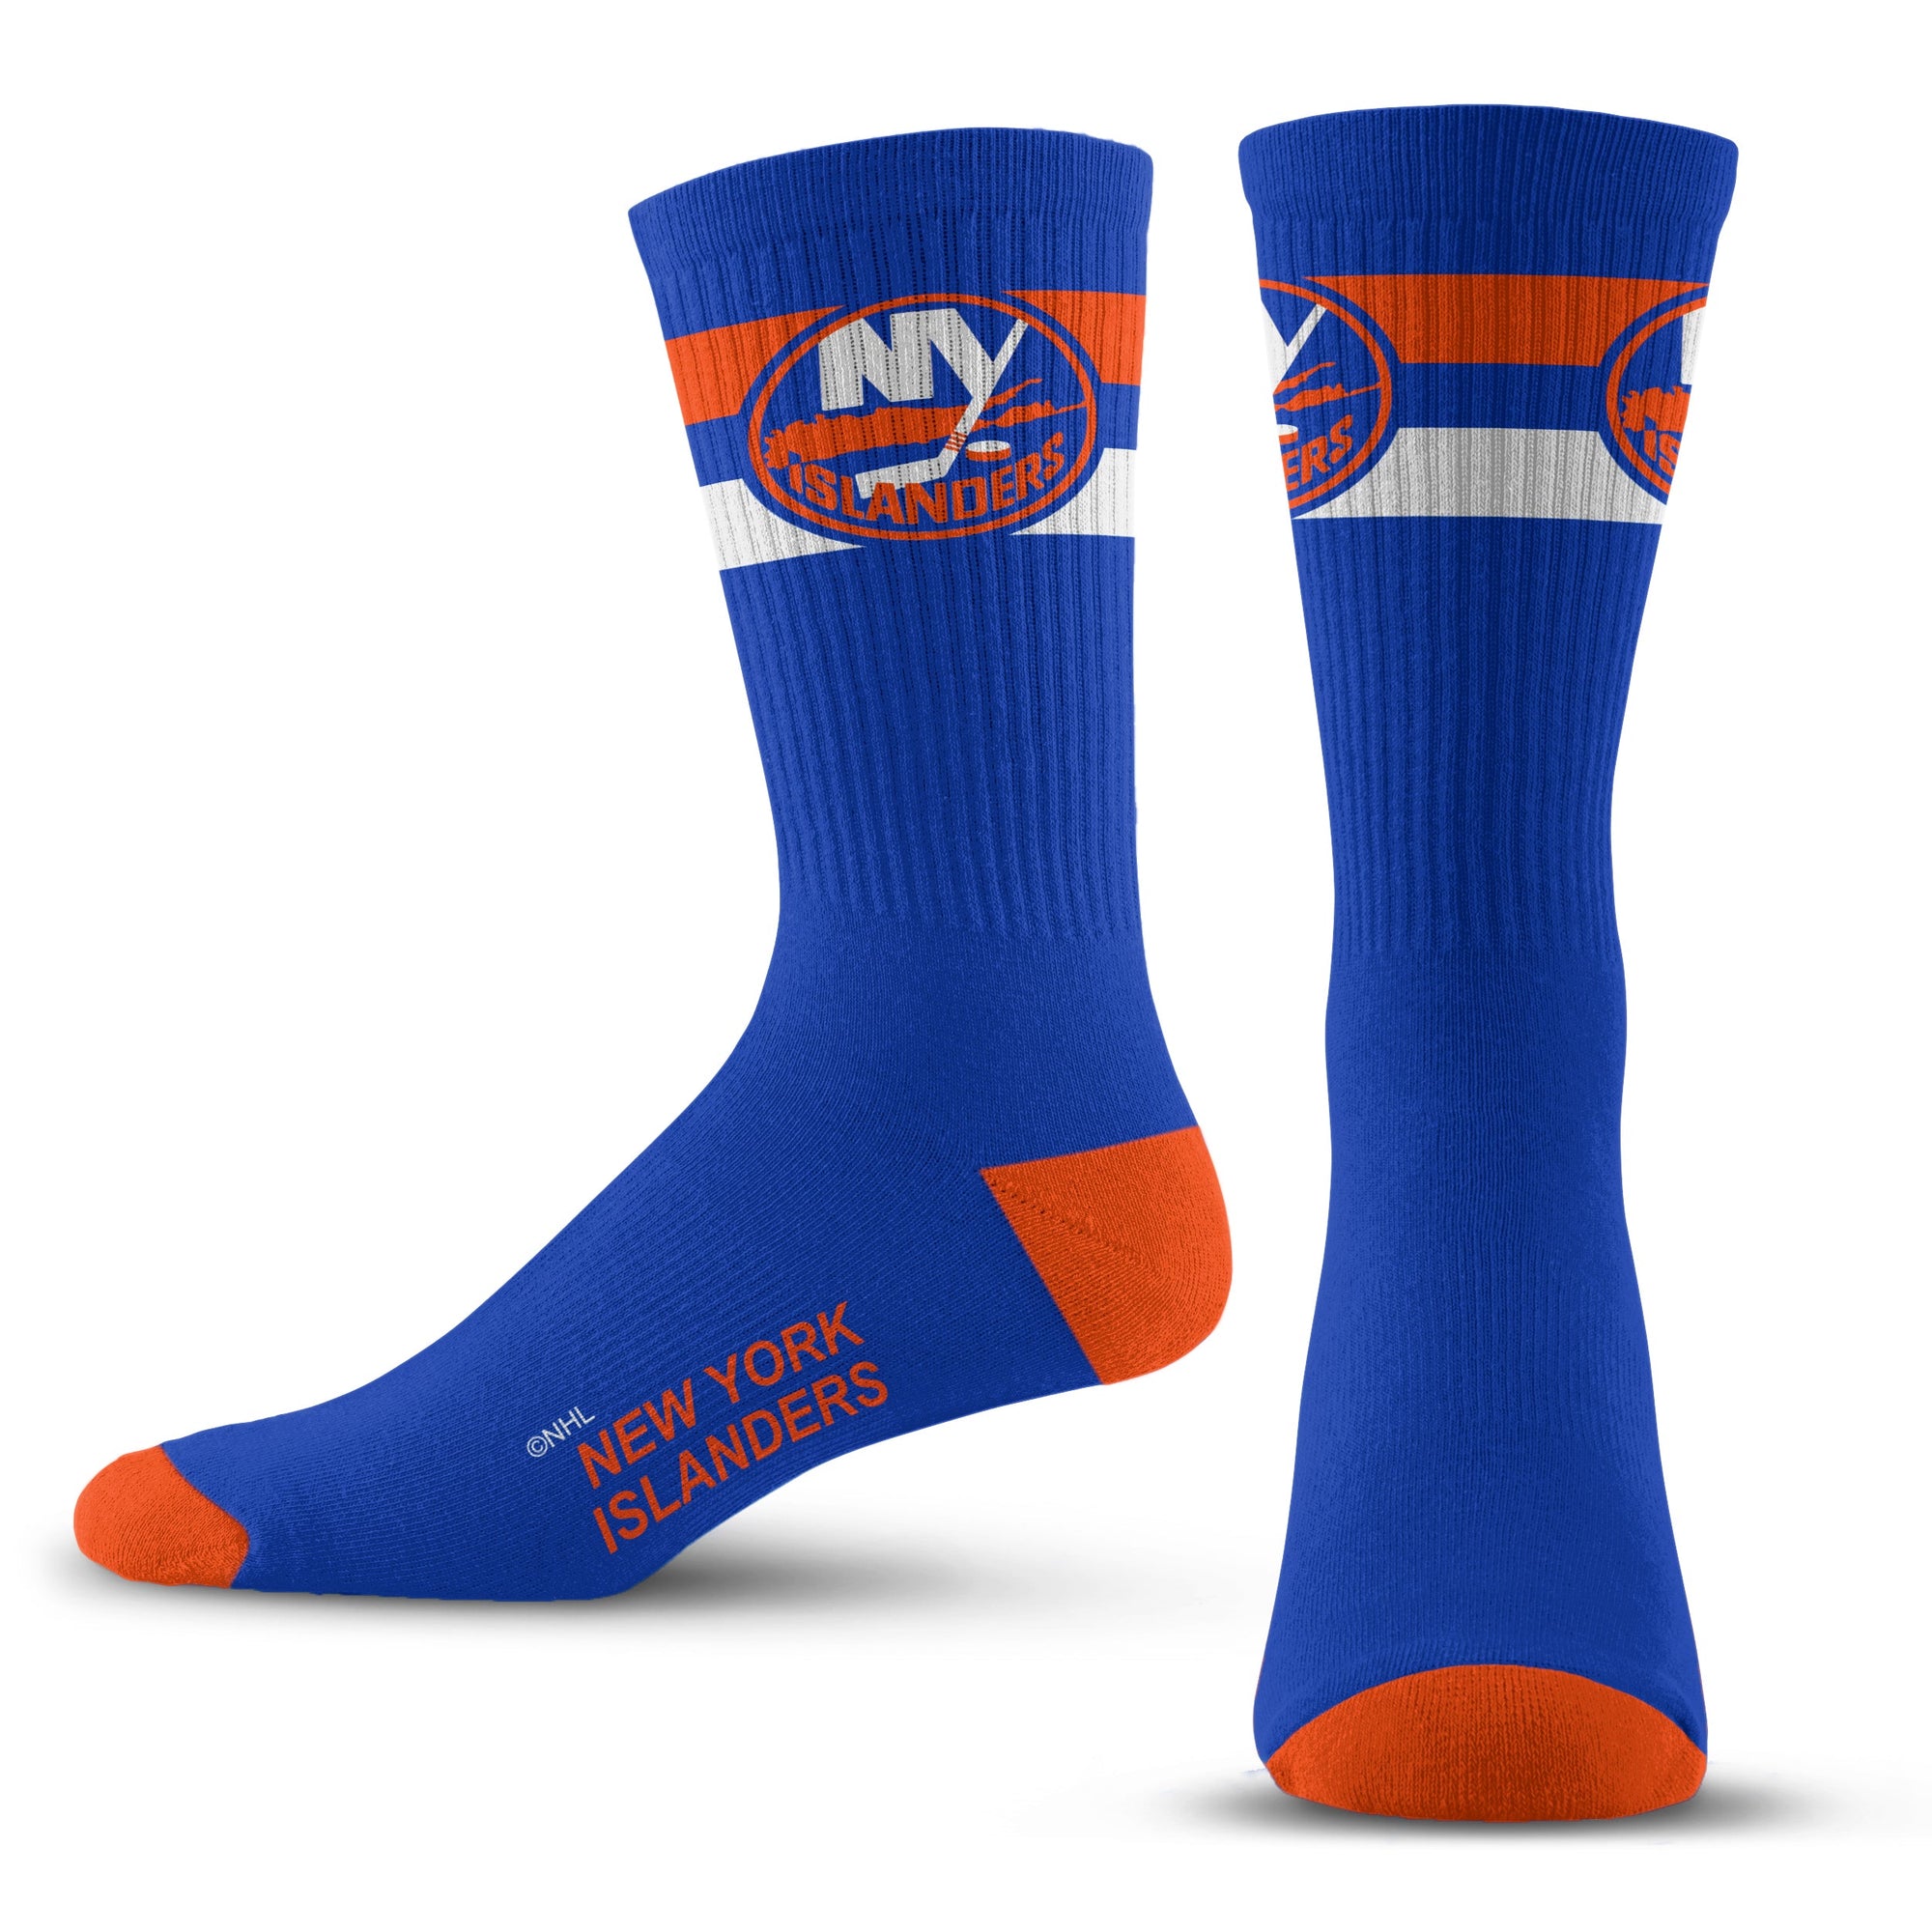 New York Islanders on X: Introducing the all-new authentic